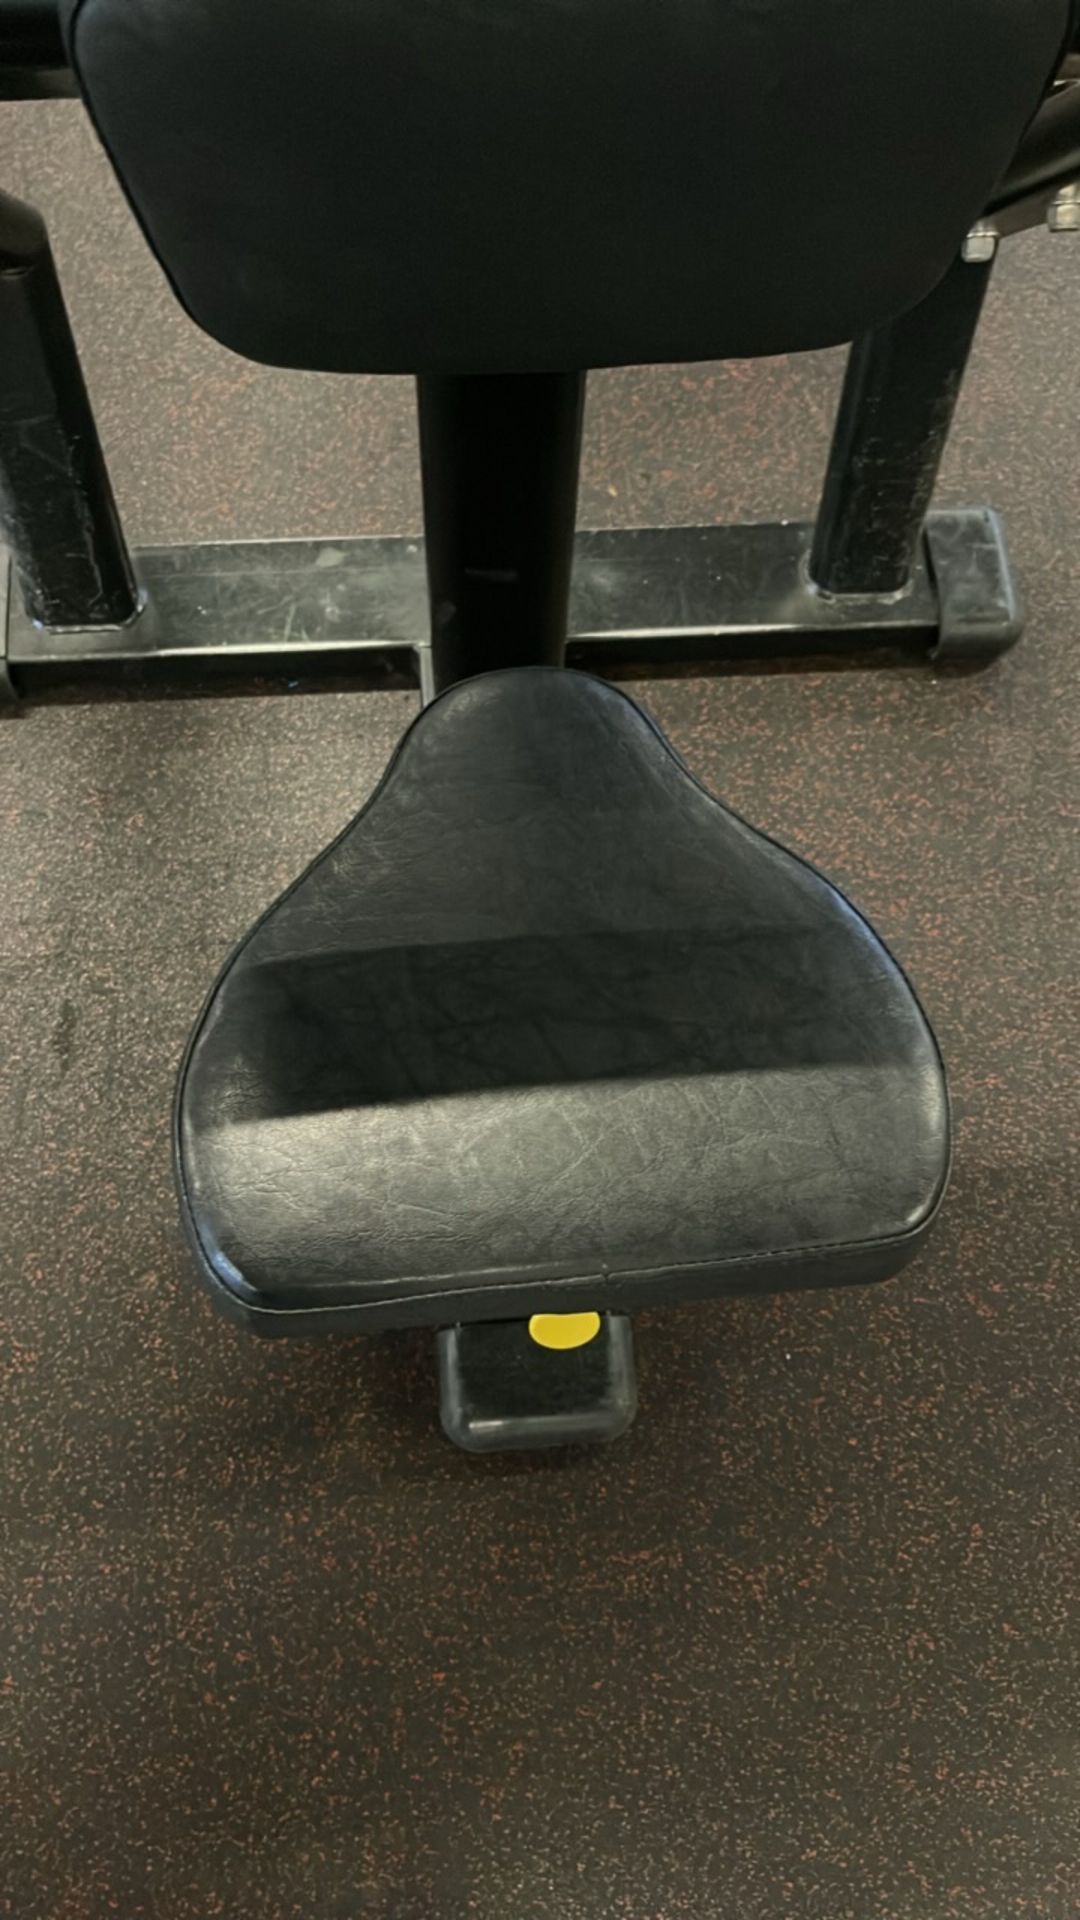 Force Preacher Curl Bench - Image 4 of 6